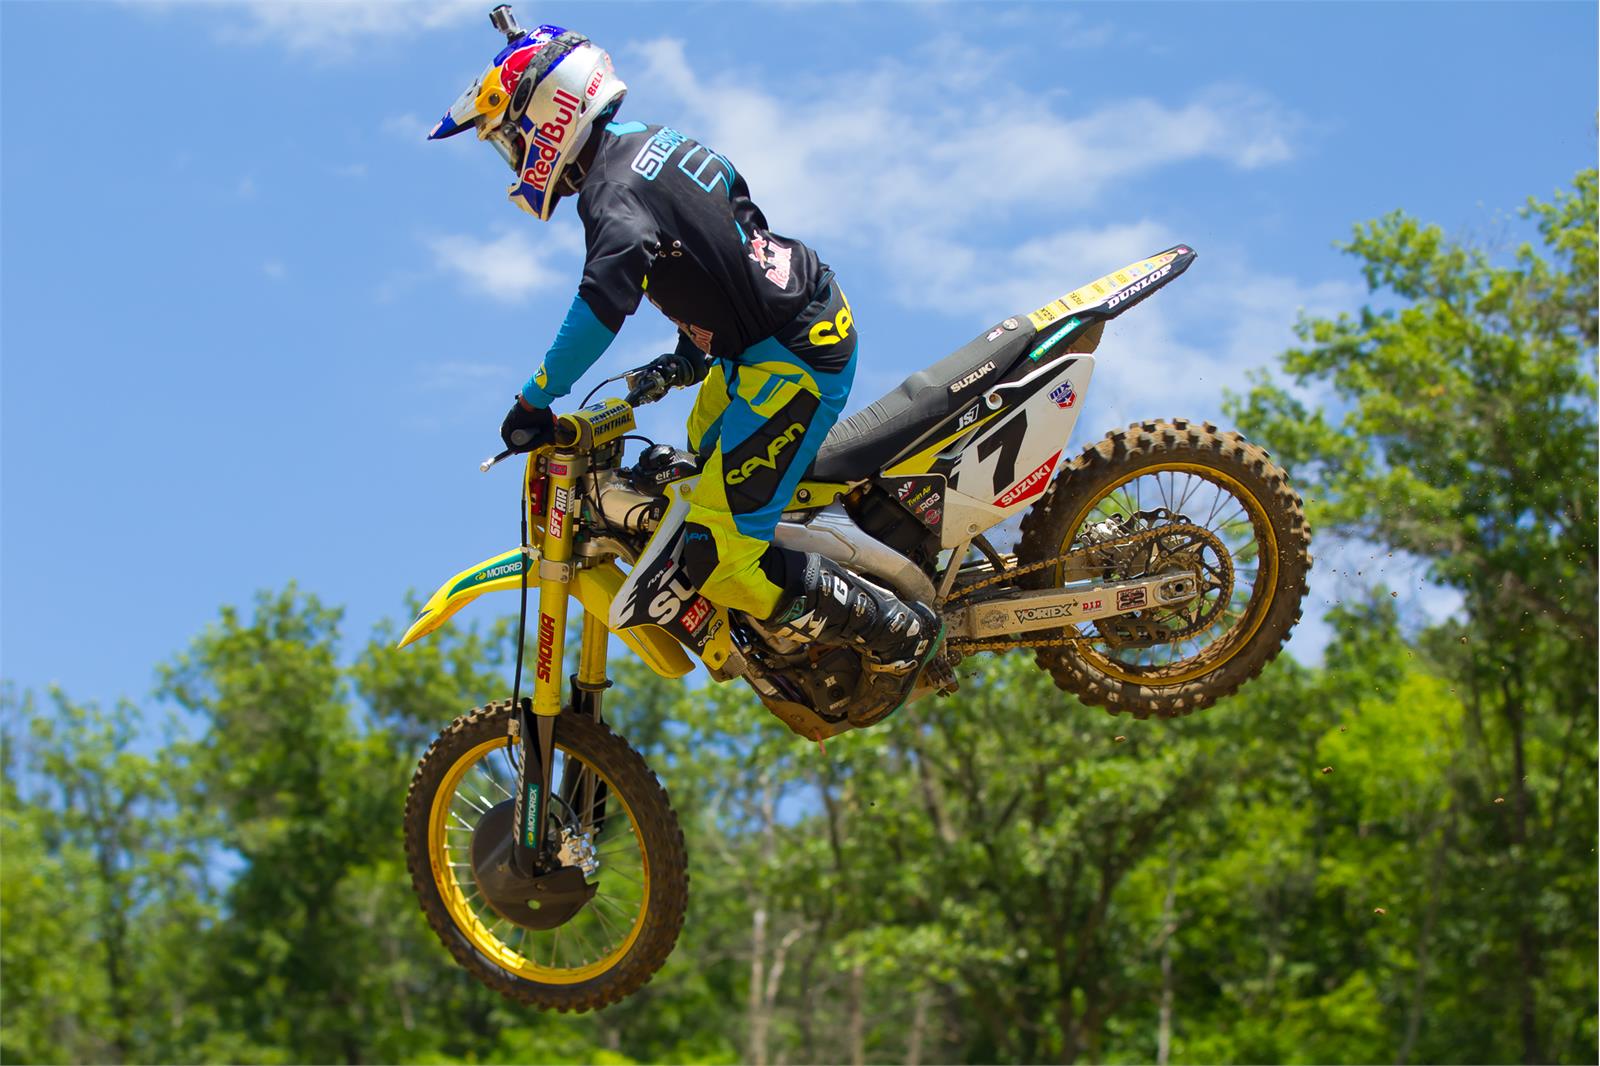 James Stewart Spring Creek return ends with a 15th finish